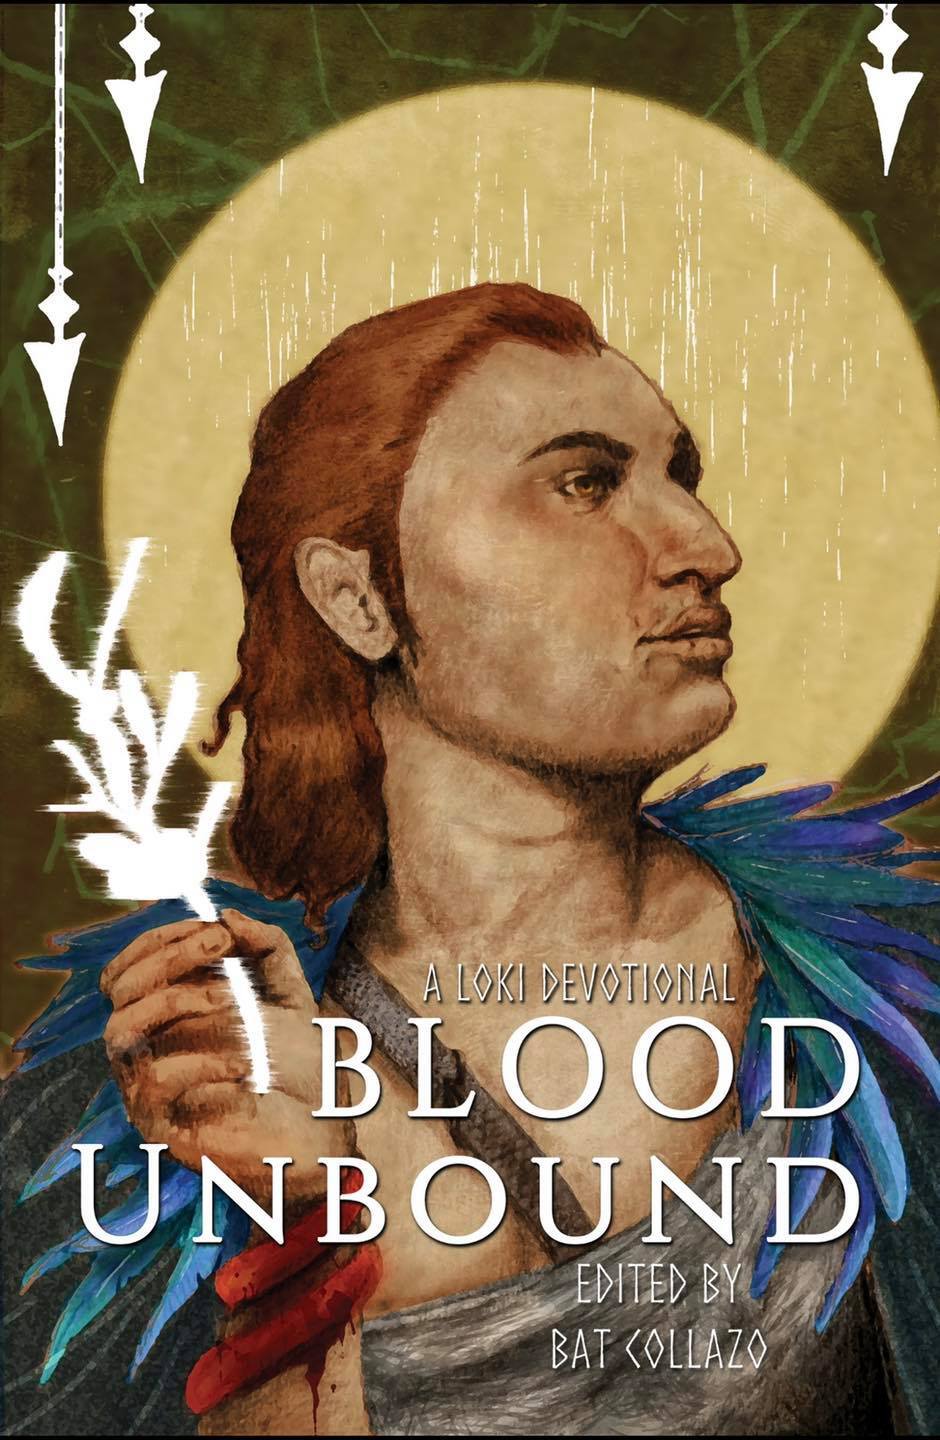 Image of Loki for Blood Unbound book by Sae Lokason